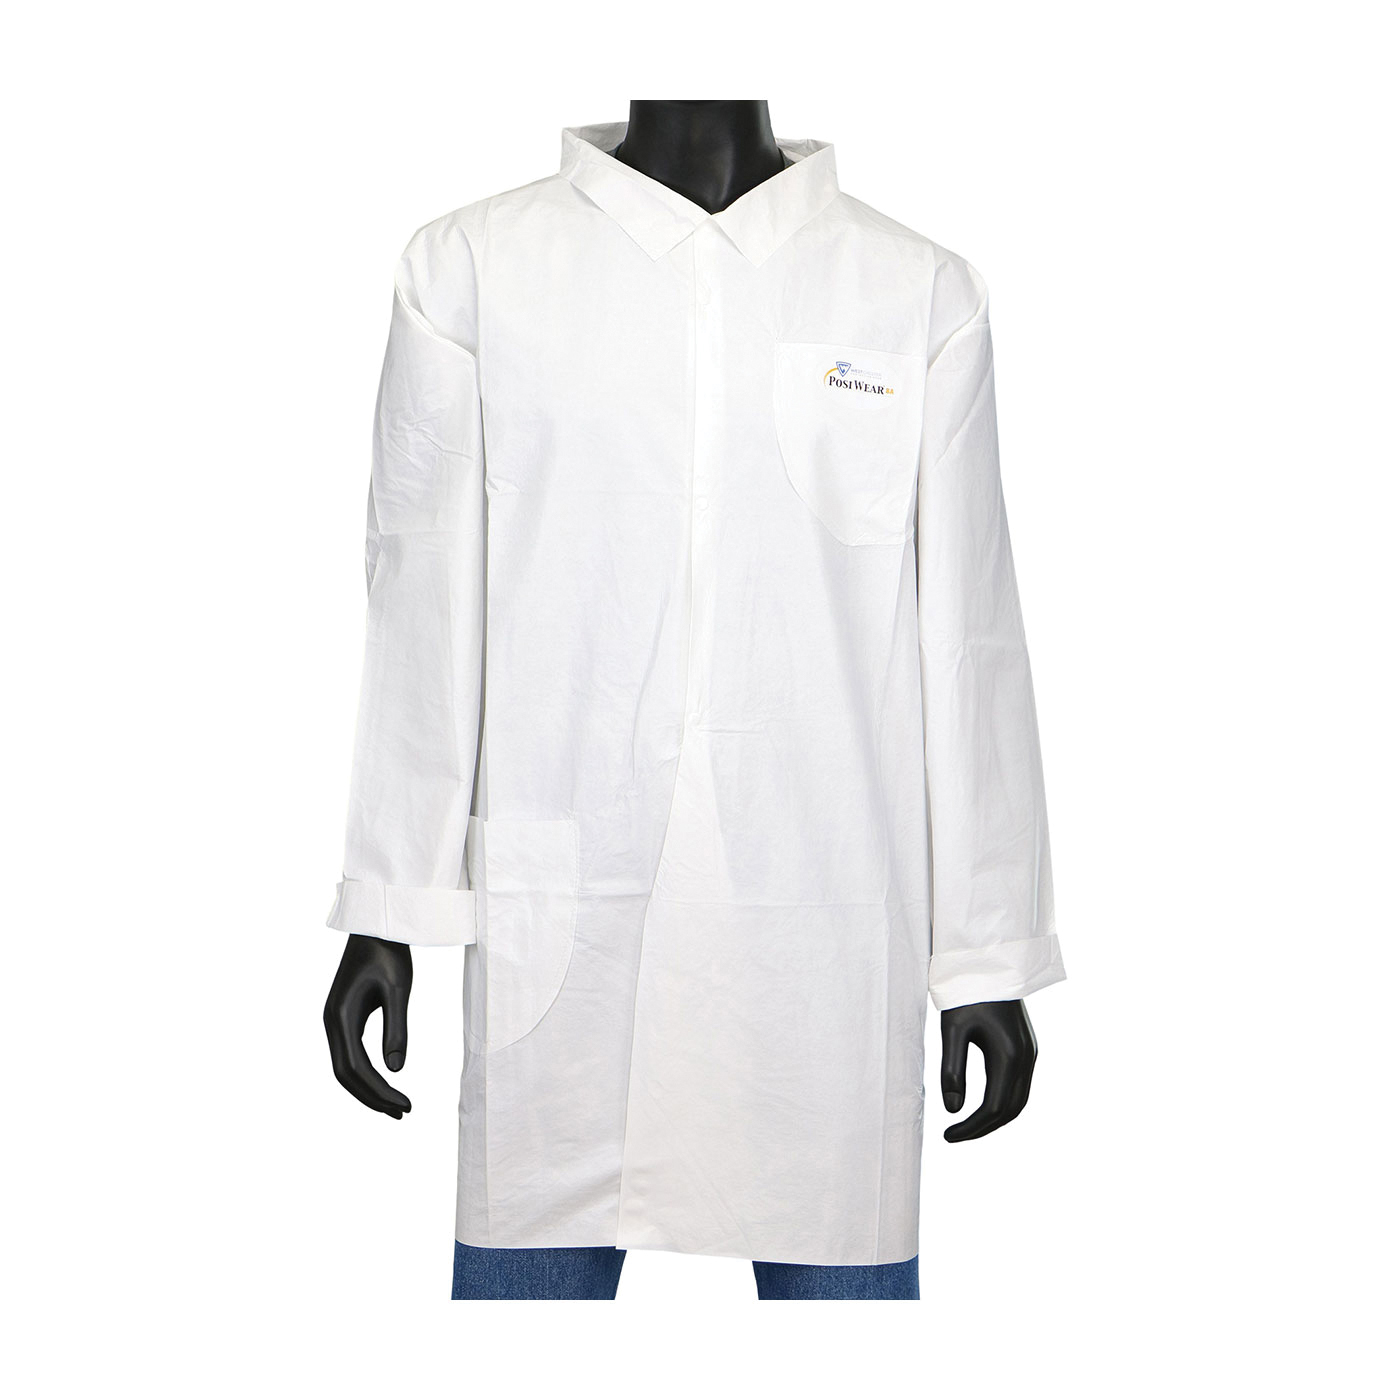 PIP® 3620/2XL 3620 BA Lab Coat, 2XL, White, Polypropylene/Polyethylene, 38-1/2 in L, Front Snap Closure, 2 Pockets, ANSI Specified, ASTM 1670, NFPA 99